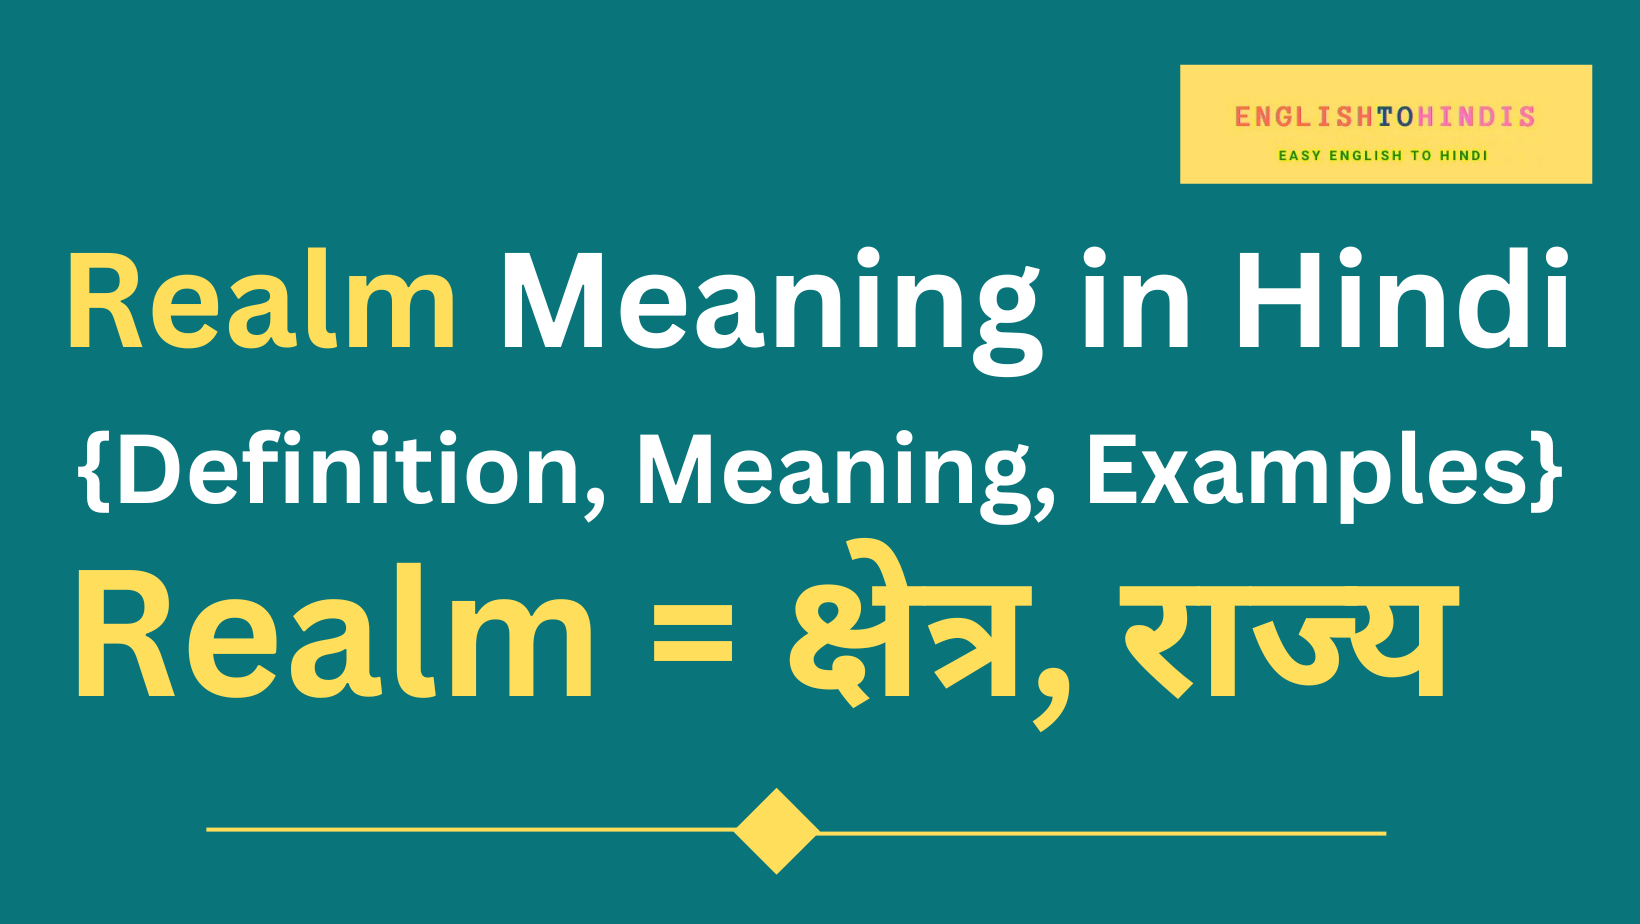 Realm Meaning in Hindi